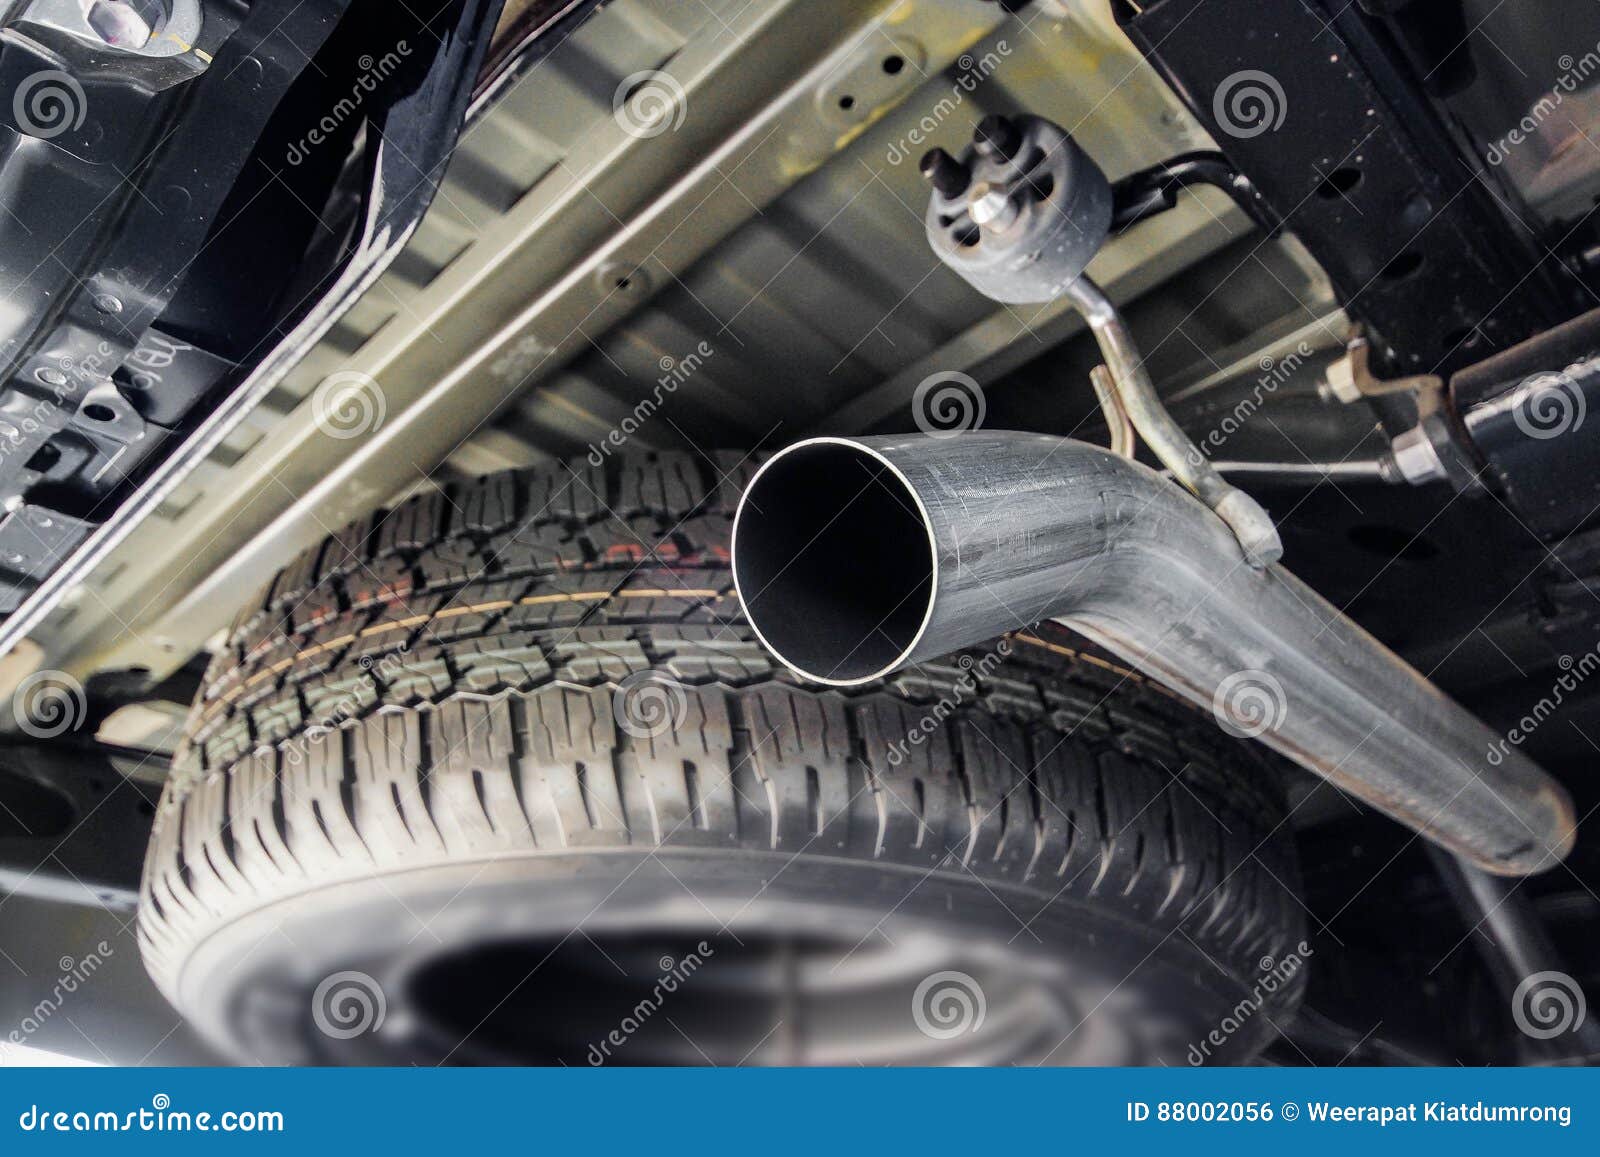 Exhaust pipe stock photo. Image of fumes, auto, exhaust - 88002056